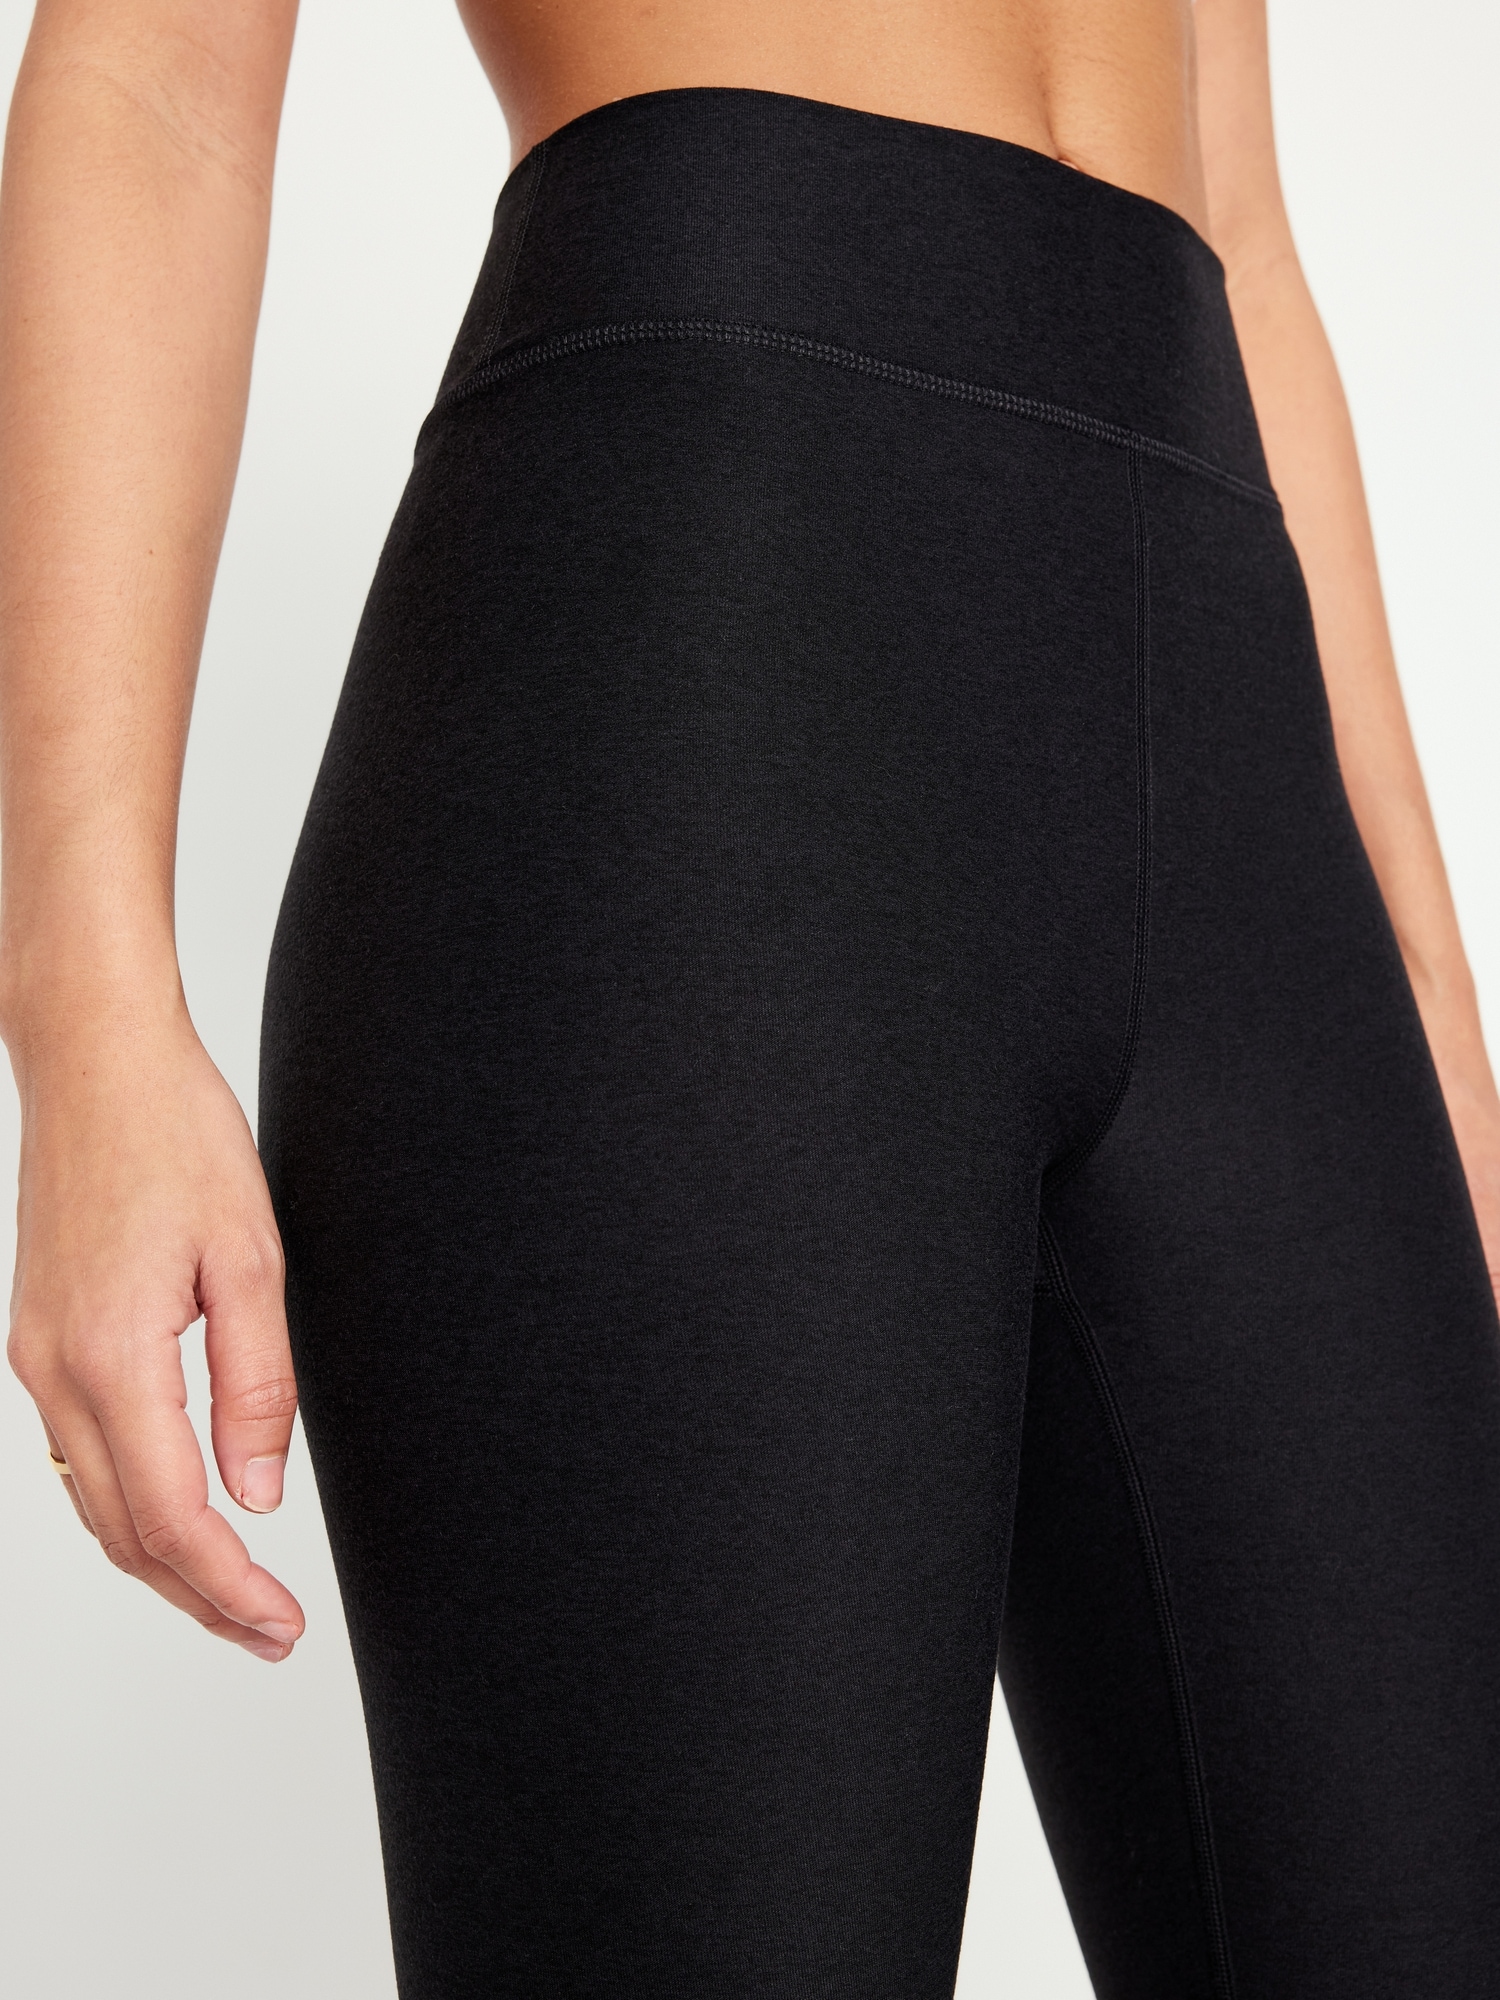 OLD NAVY ACTIVE Go Dry Leggings High Waisted Black Size Xs £7.89